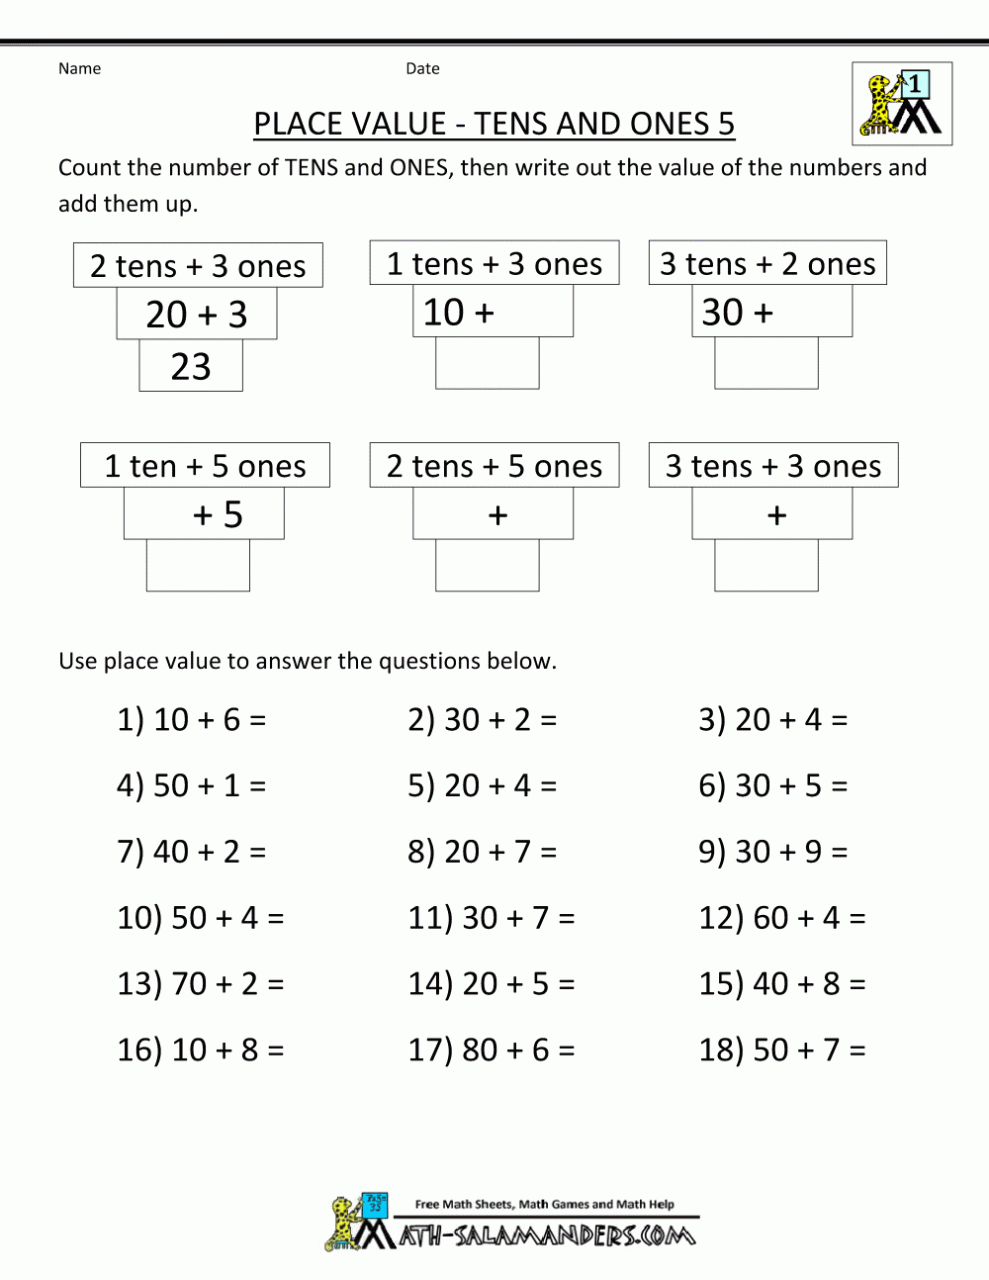 Free Math Worksheets For 1St Grade Place Value